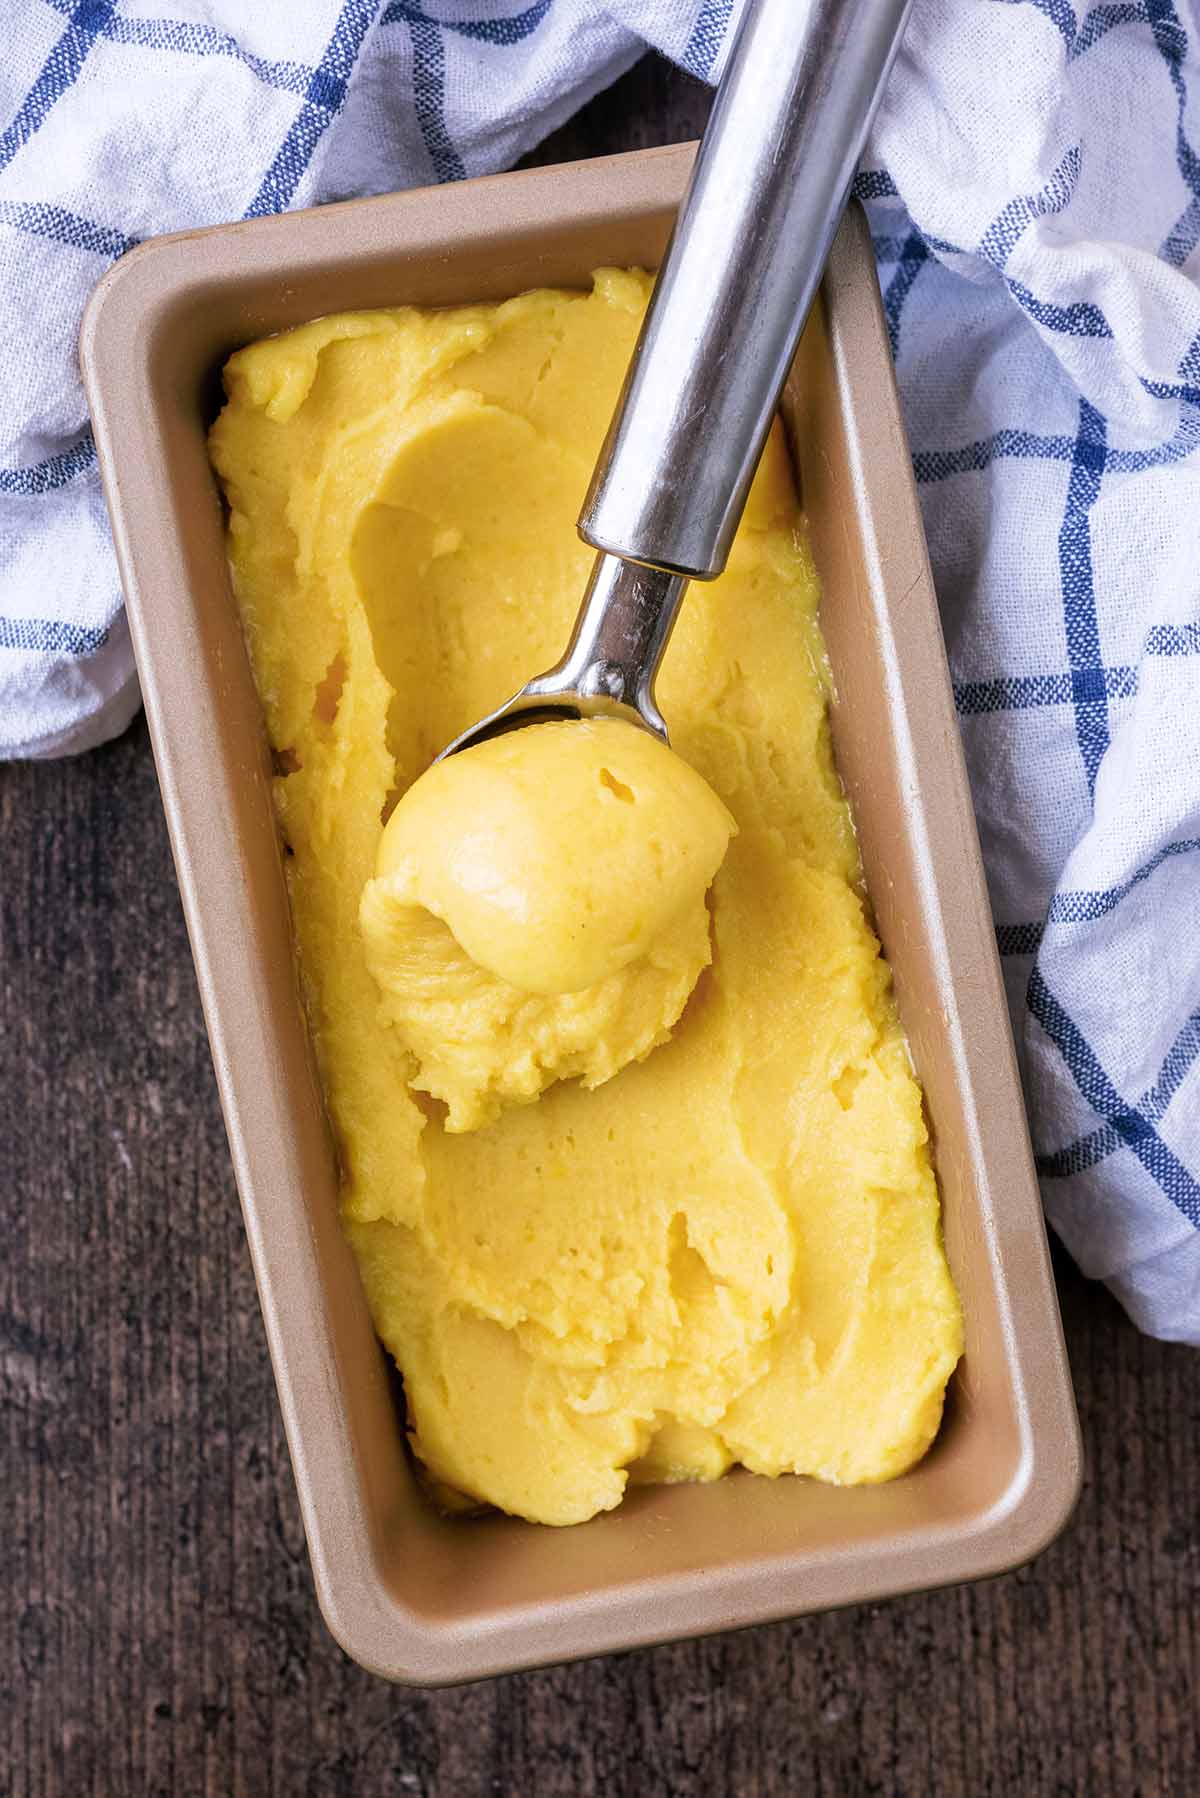 A tub of sorbet with an ice cream scoop scooping some out.